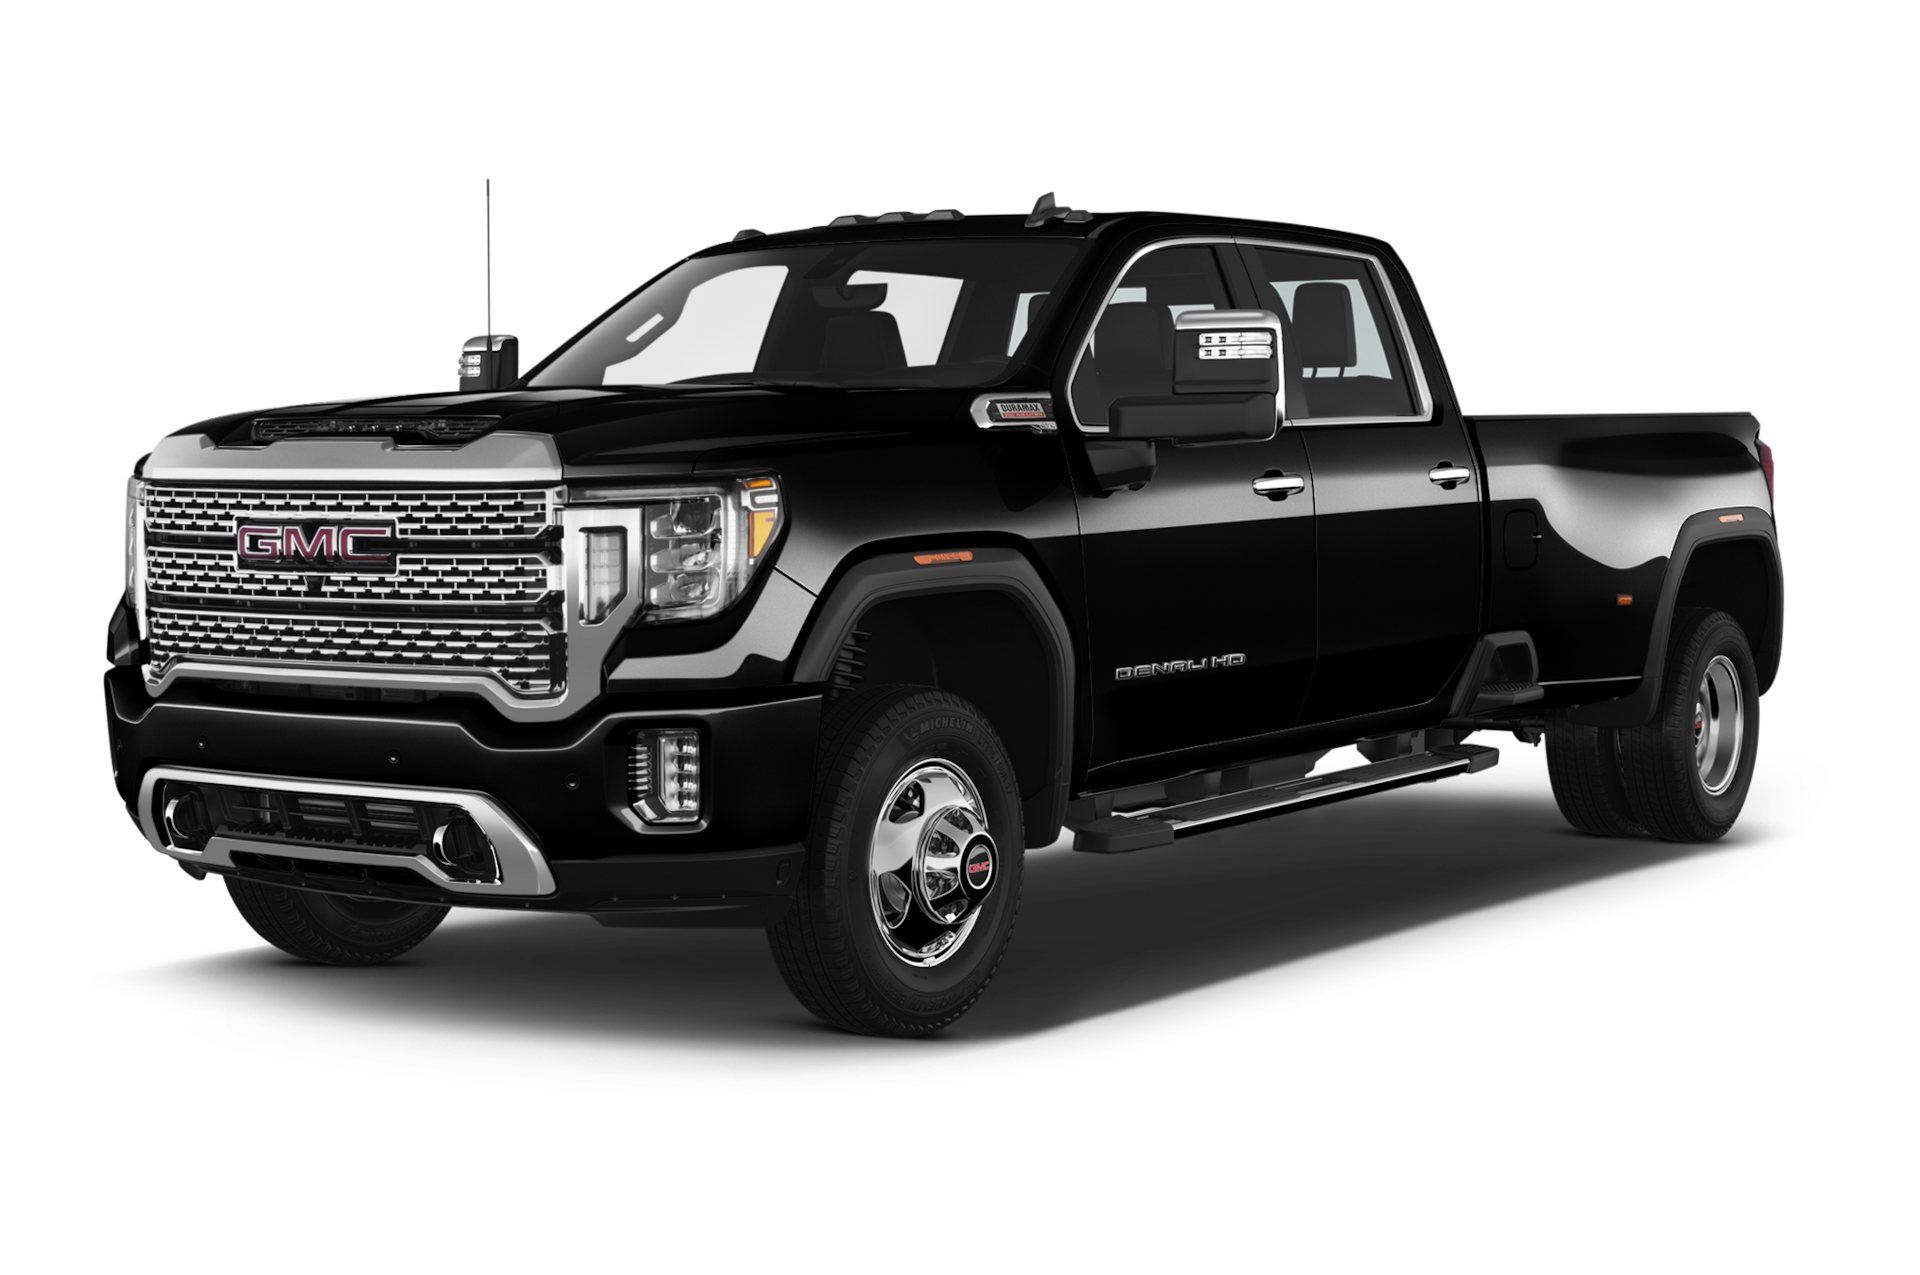 2020 GMC Sierra 3500HD Prices, Reviews, and Photos - MotorTrend